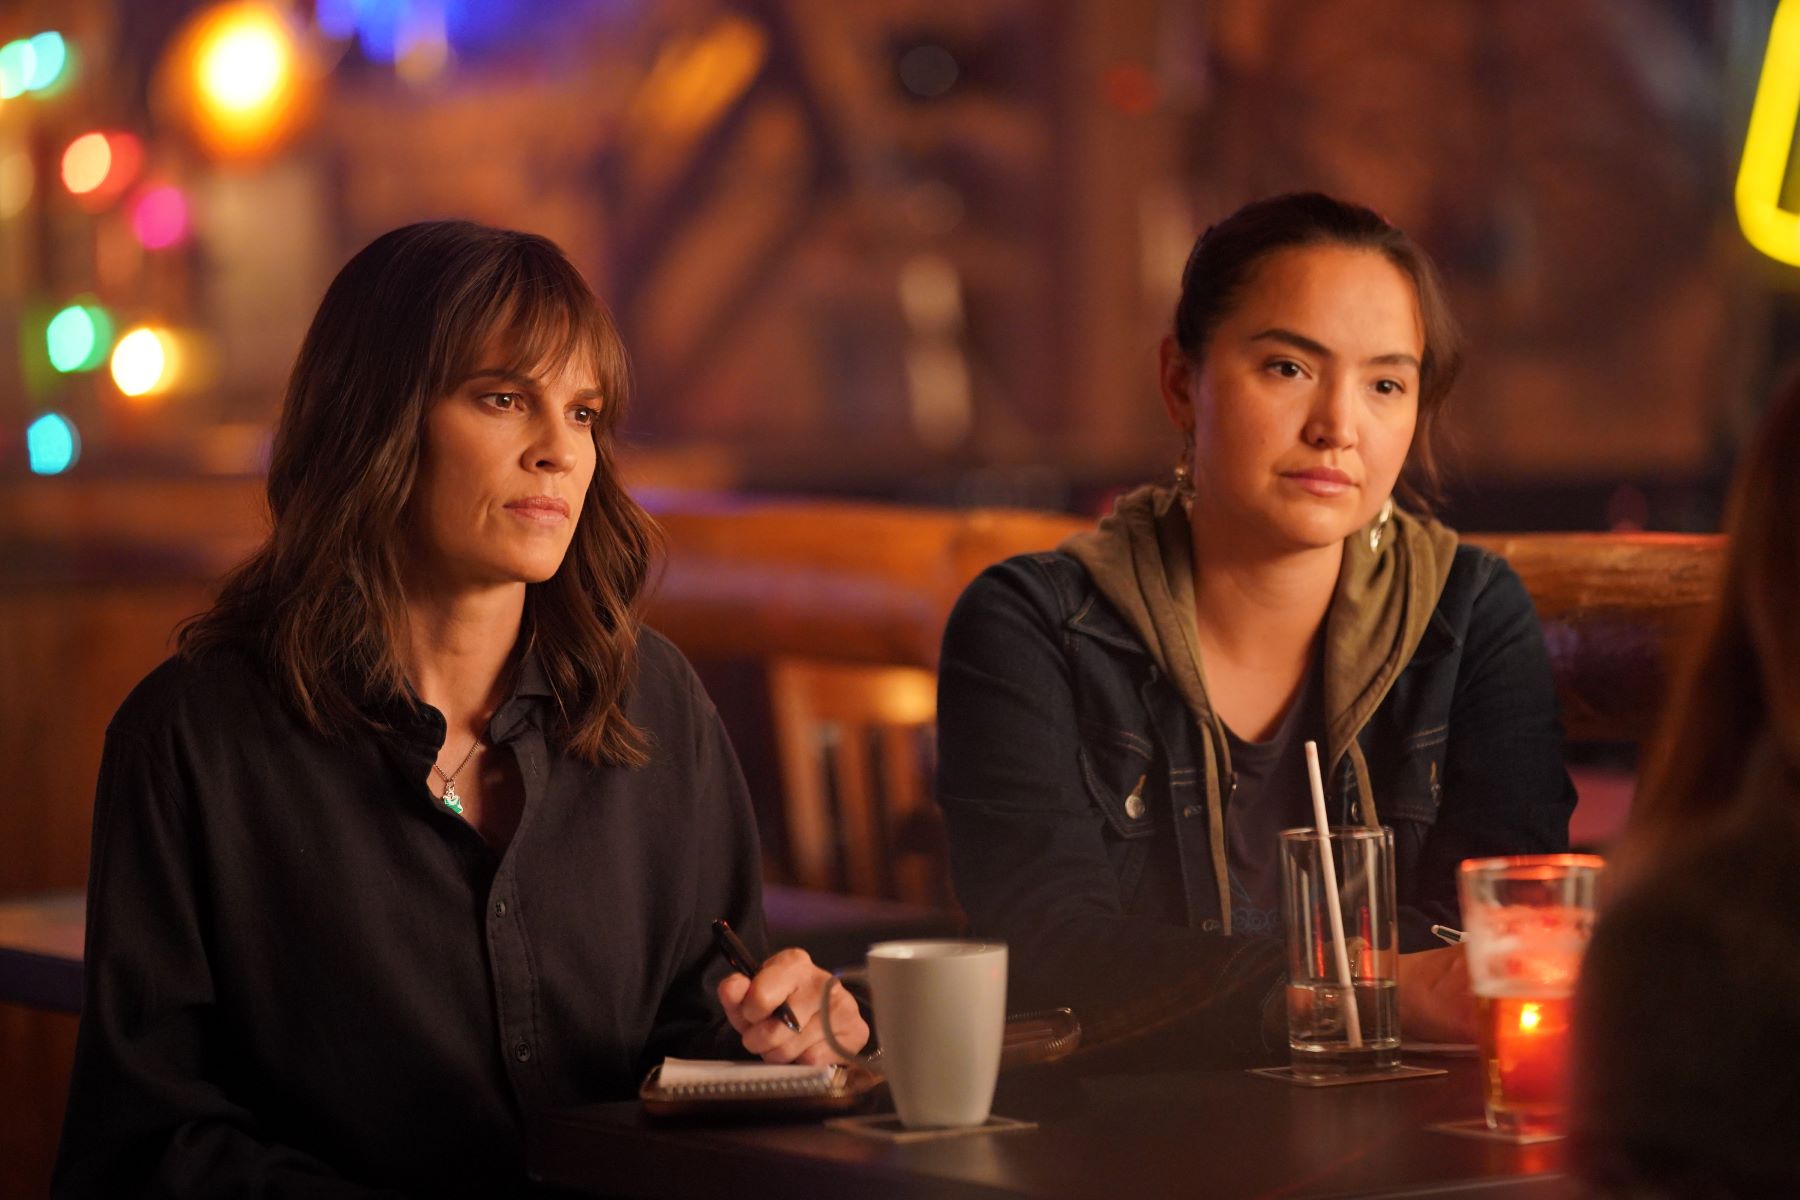 Hilary Swank and Grace Dove, in character as Eileen and Roz in 'Alaska Daily' Season 1 Episode 5, 'I Have No Idea What You’re Talking About, Eileen,' share a scene. Eileen wears a black button-up long-sleeved shirt. Roz wears a dark jean jacket over a brown hoodie and gray shirt.